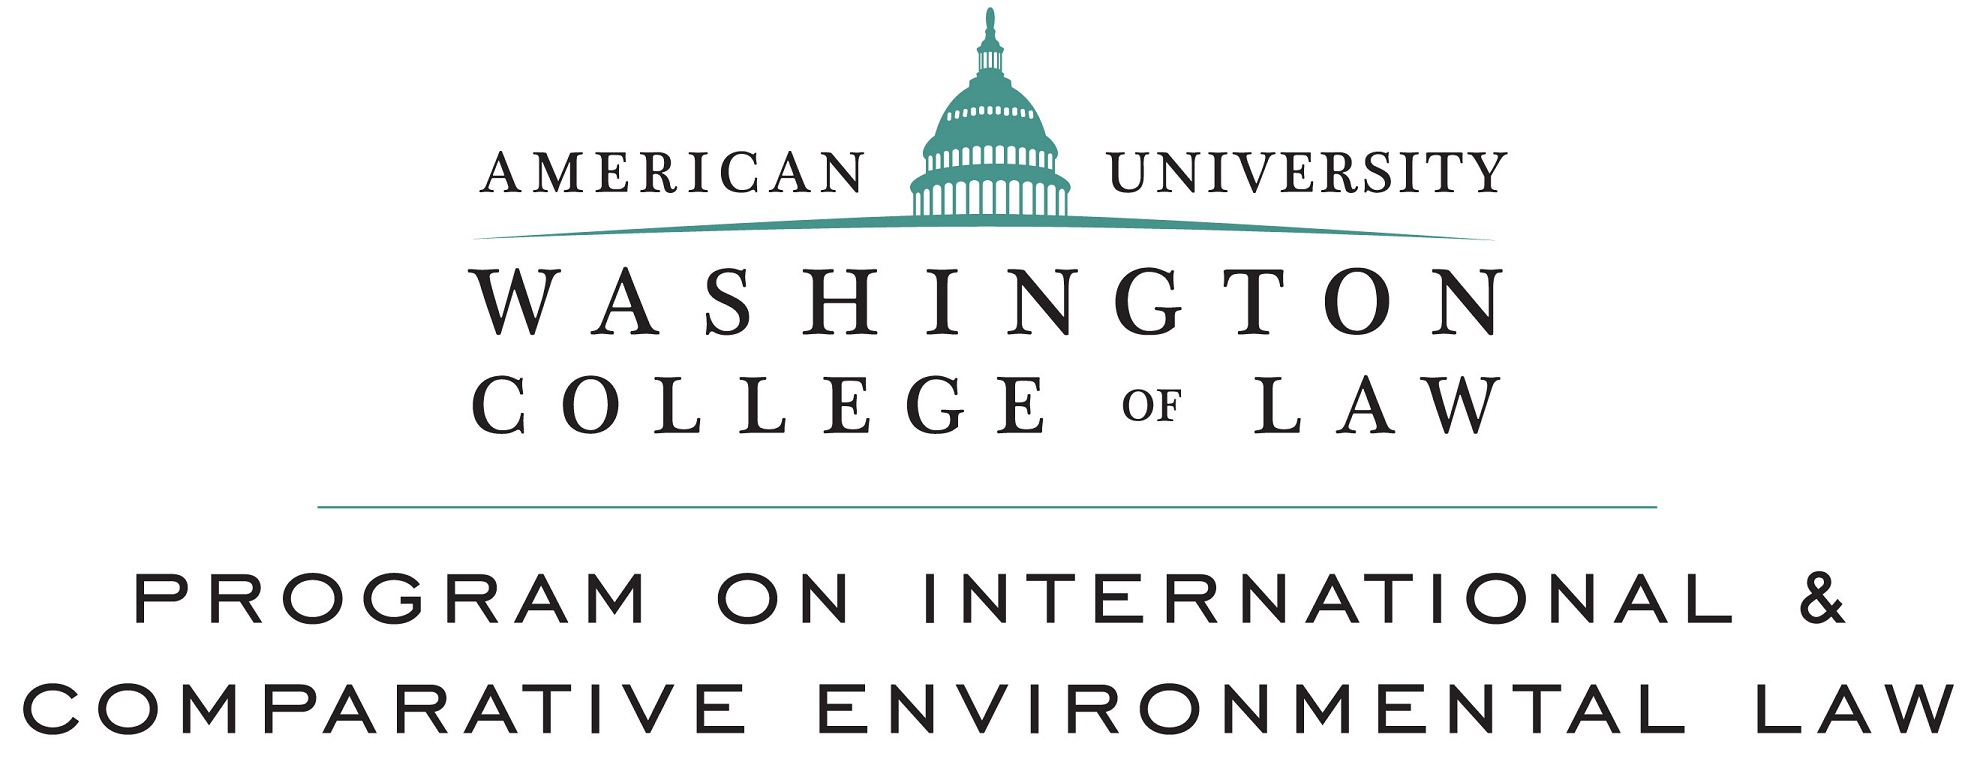 wcl_logo_comparative_environmental_law_vertical